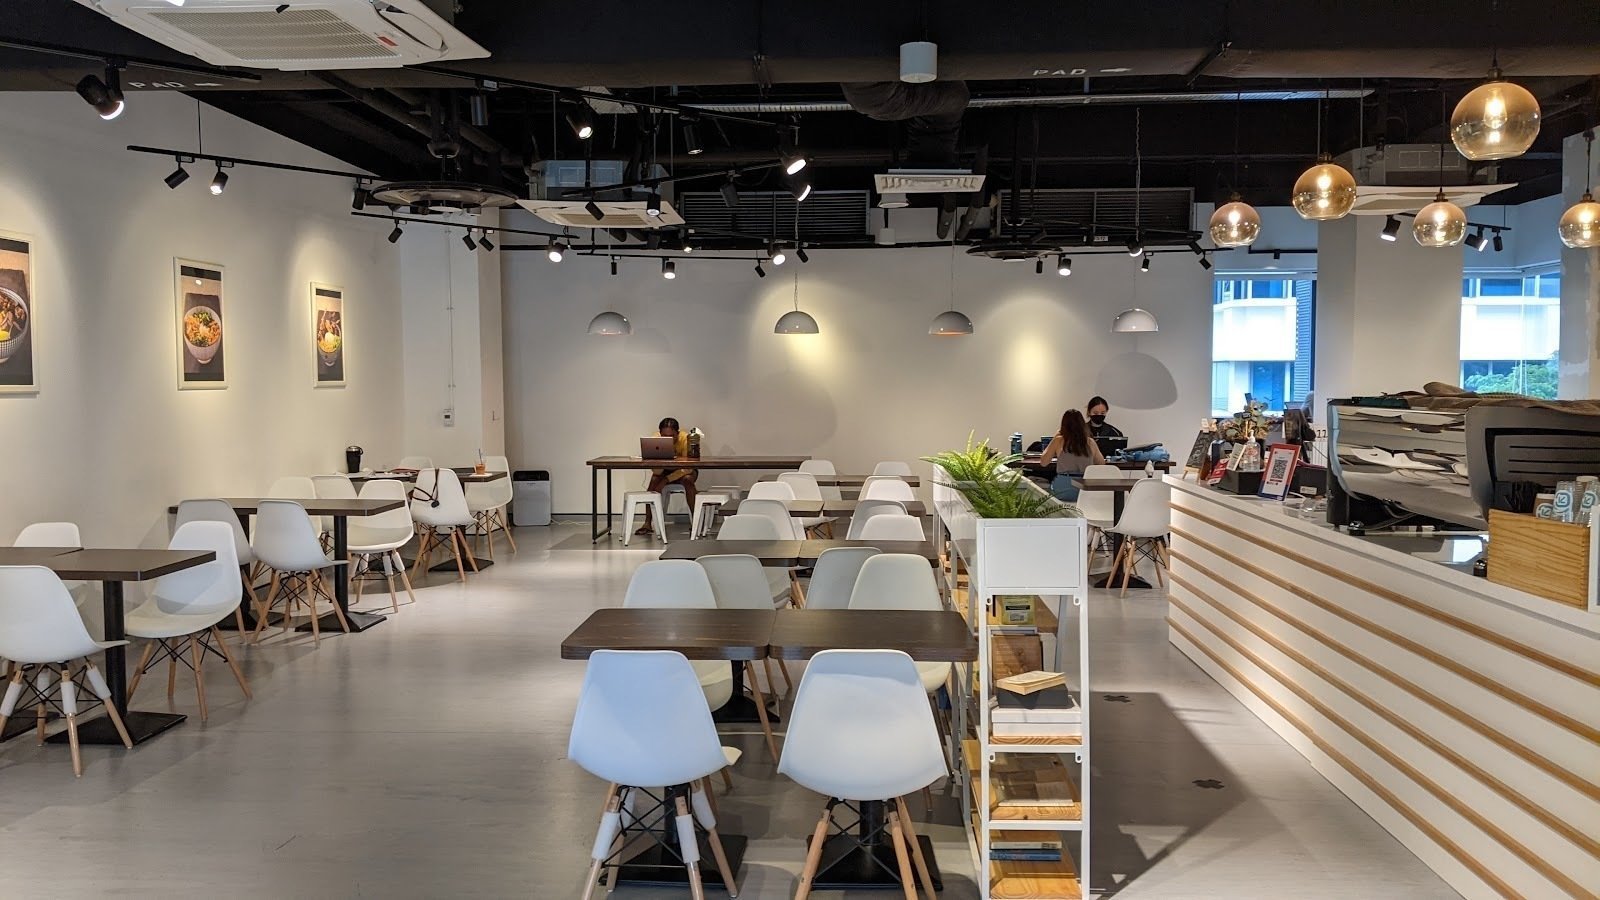 <span class="translation_missing" title="translation missing: en.meta.location_title, location_name: Connect71 Cafe, city: Singapore">Location Title</span>